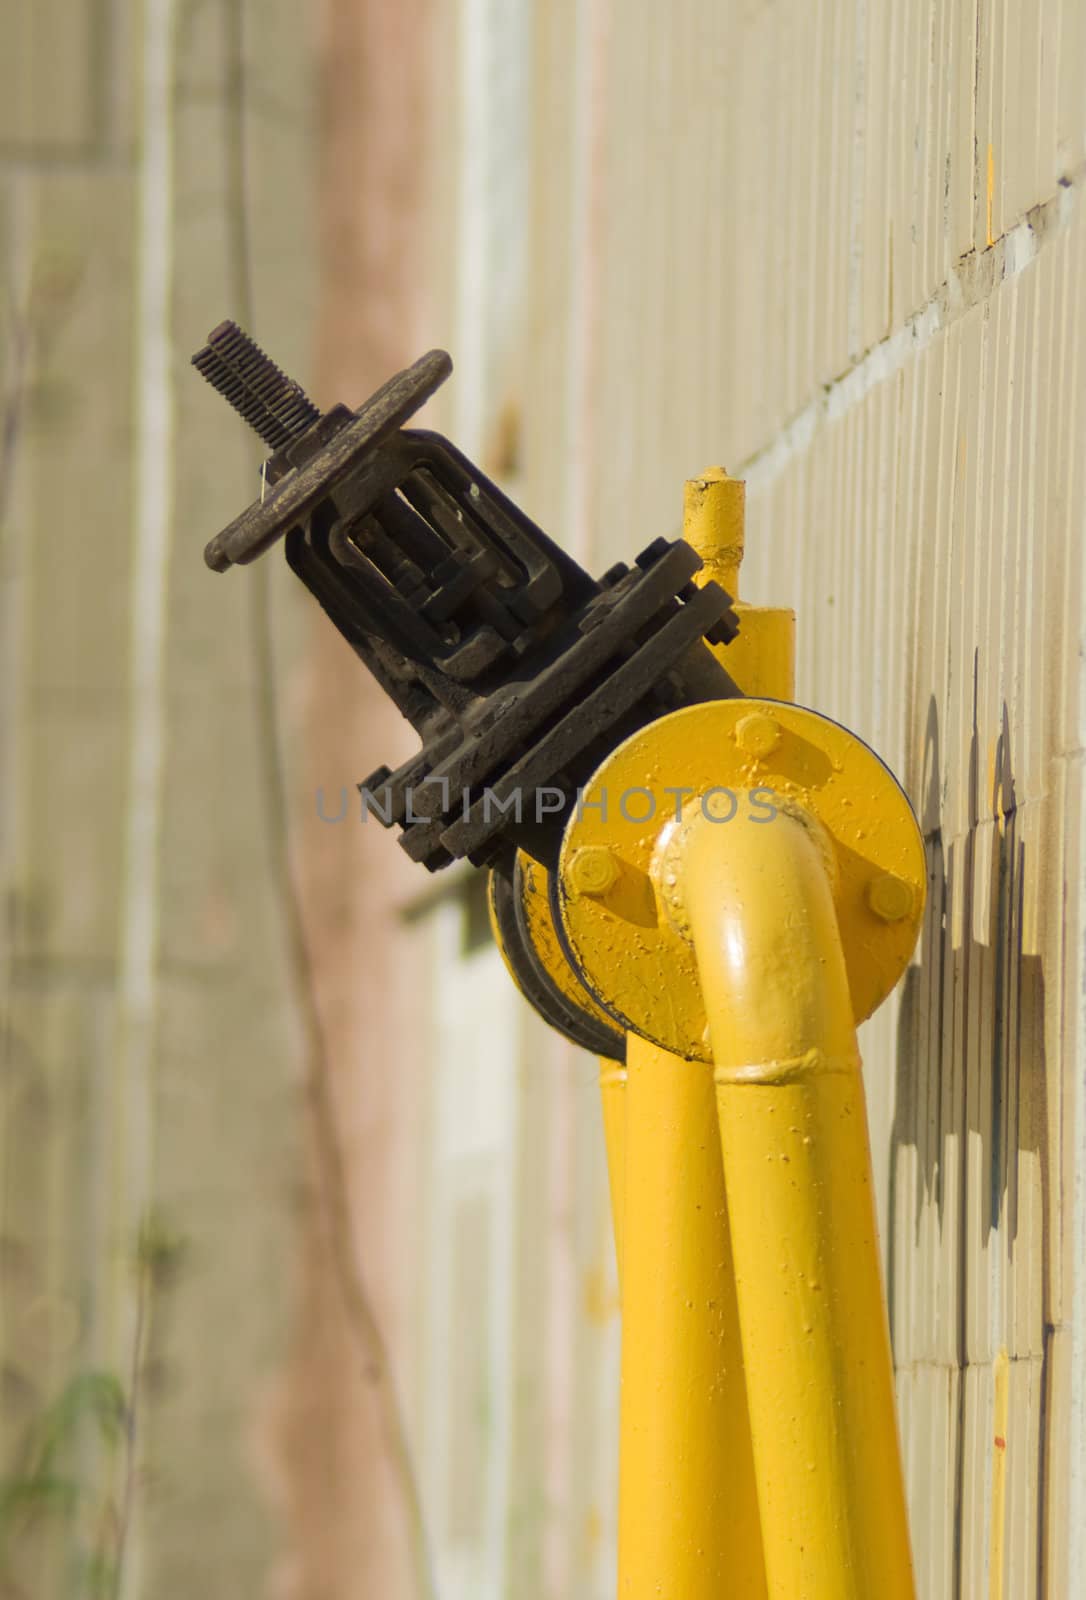 The gas gate, valve and yellow pipes. 